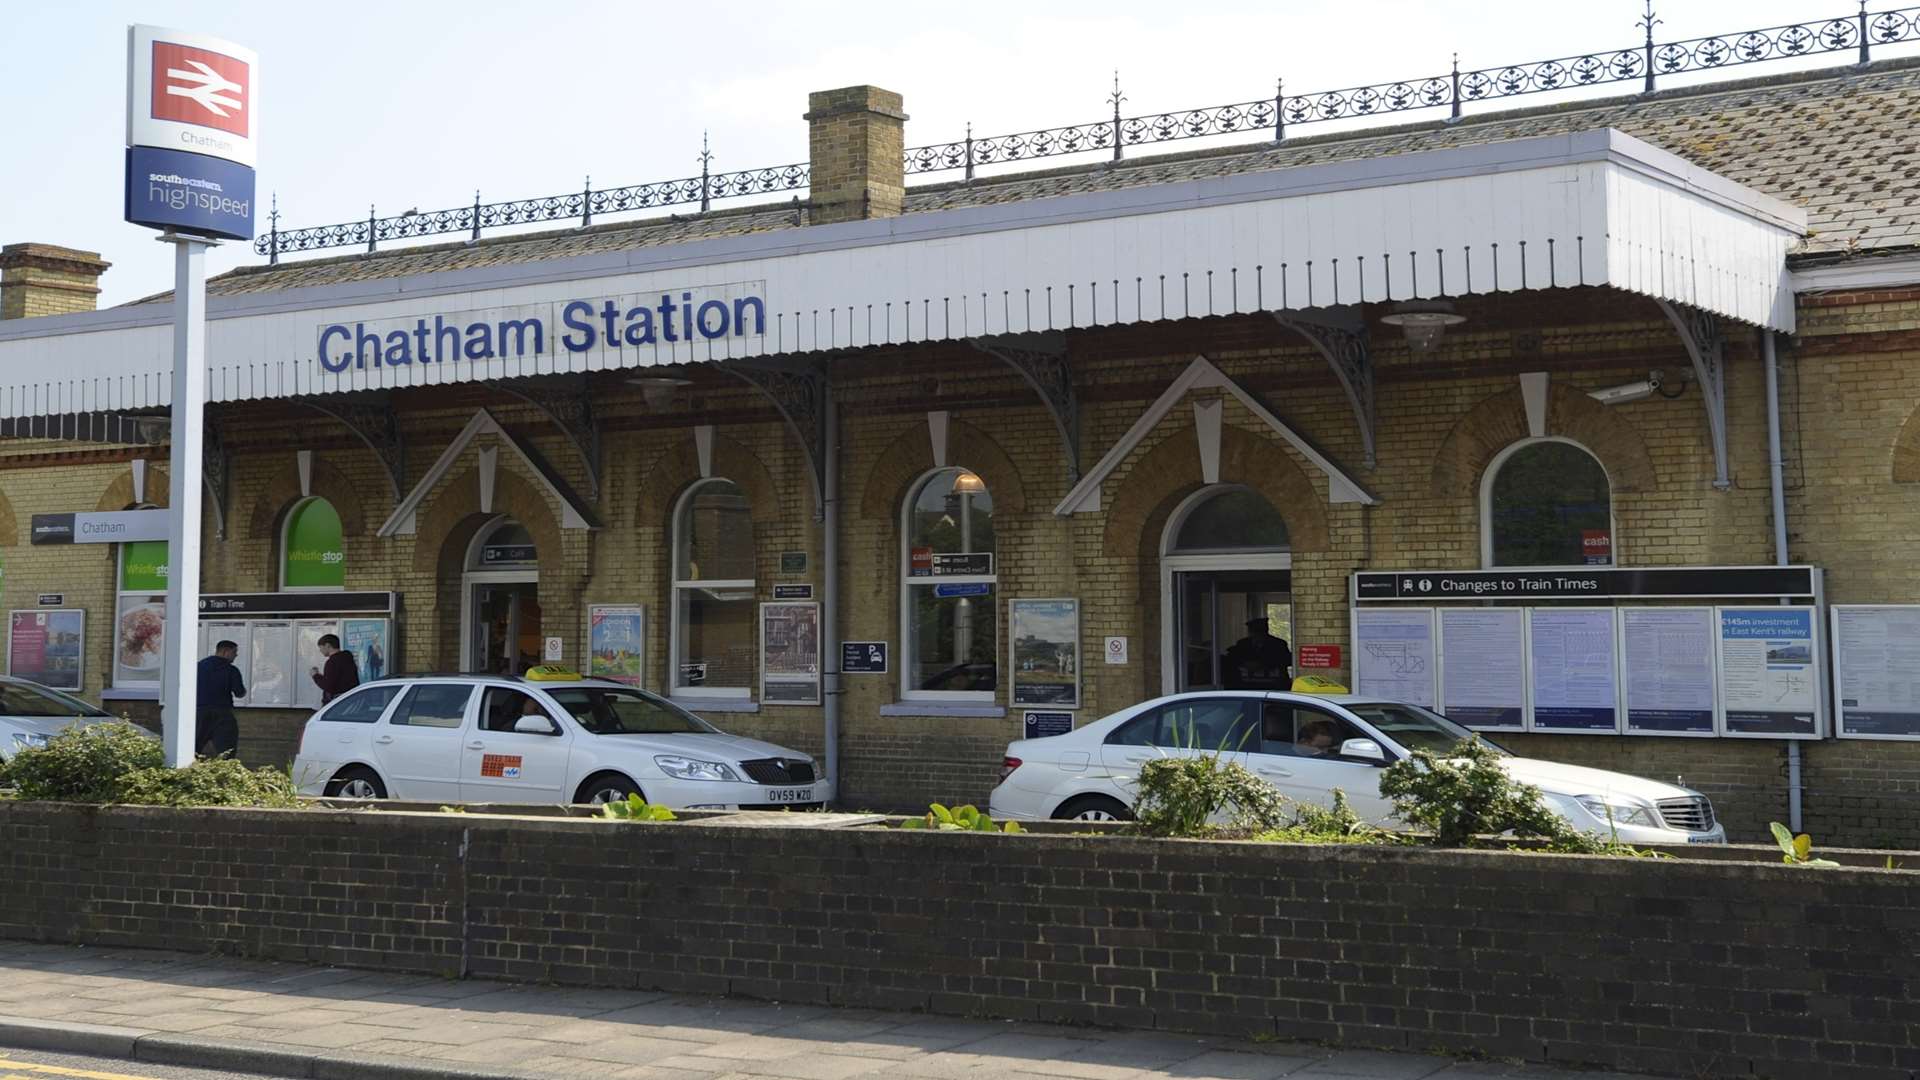 The attempted abduction happened at Chatham railway station. Library image.